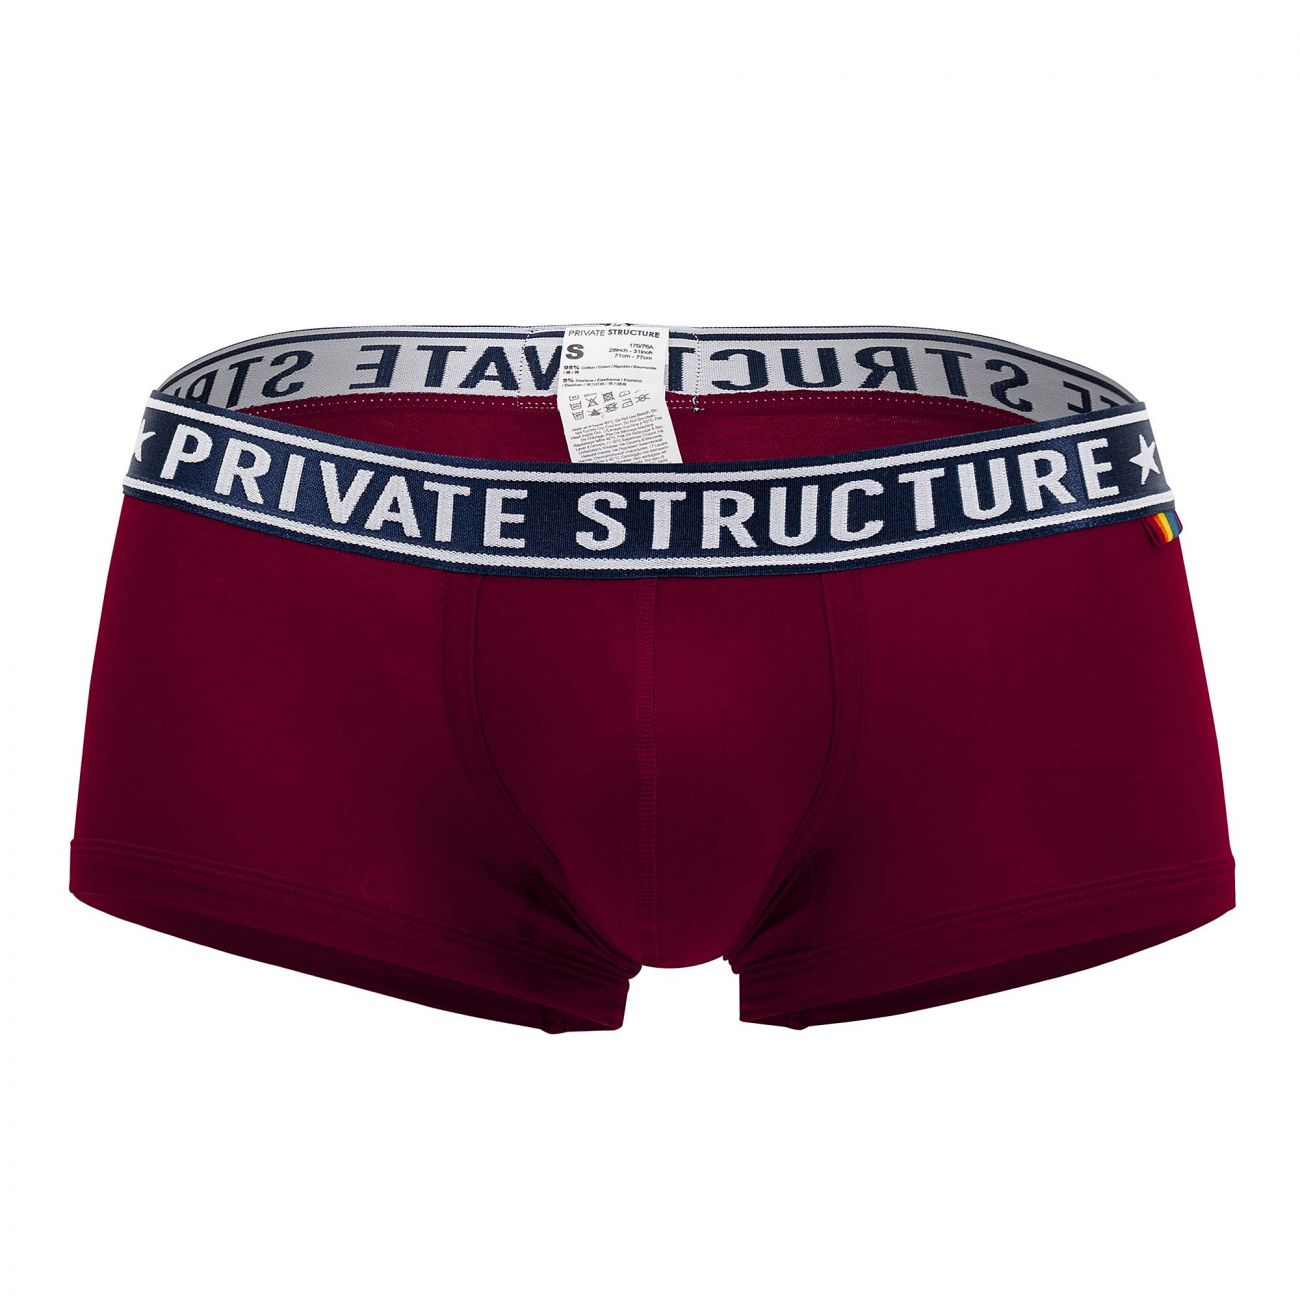 Private Structure Sporty Underwear Quantum Trunks Boxers Maroon